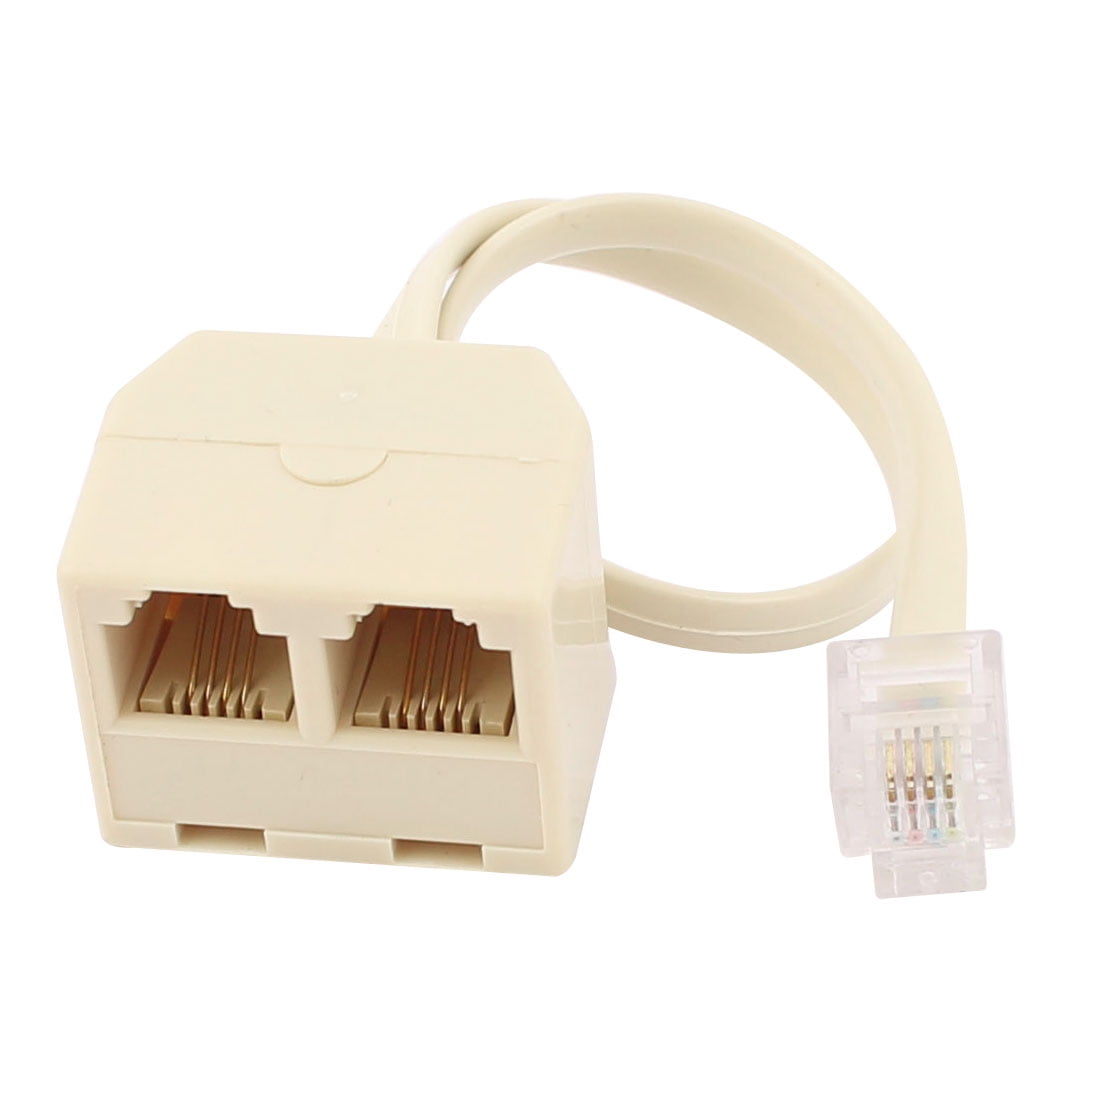 L1,L2 L1+L2 multi/2 line/cord/wire/cable Phone,Telephone number Splitter/Adapter 